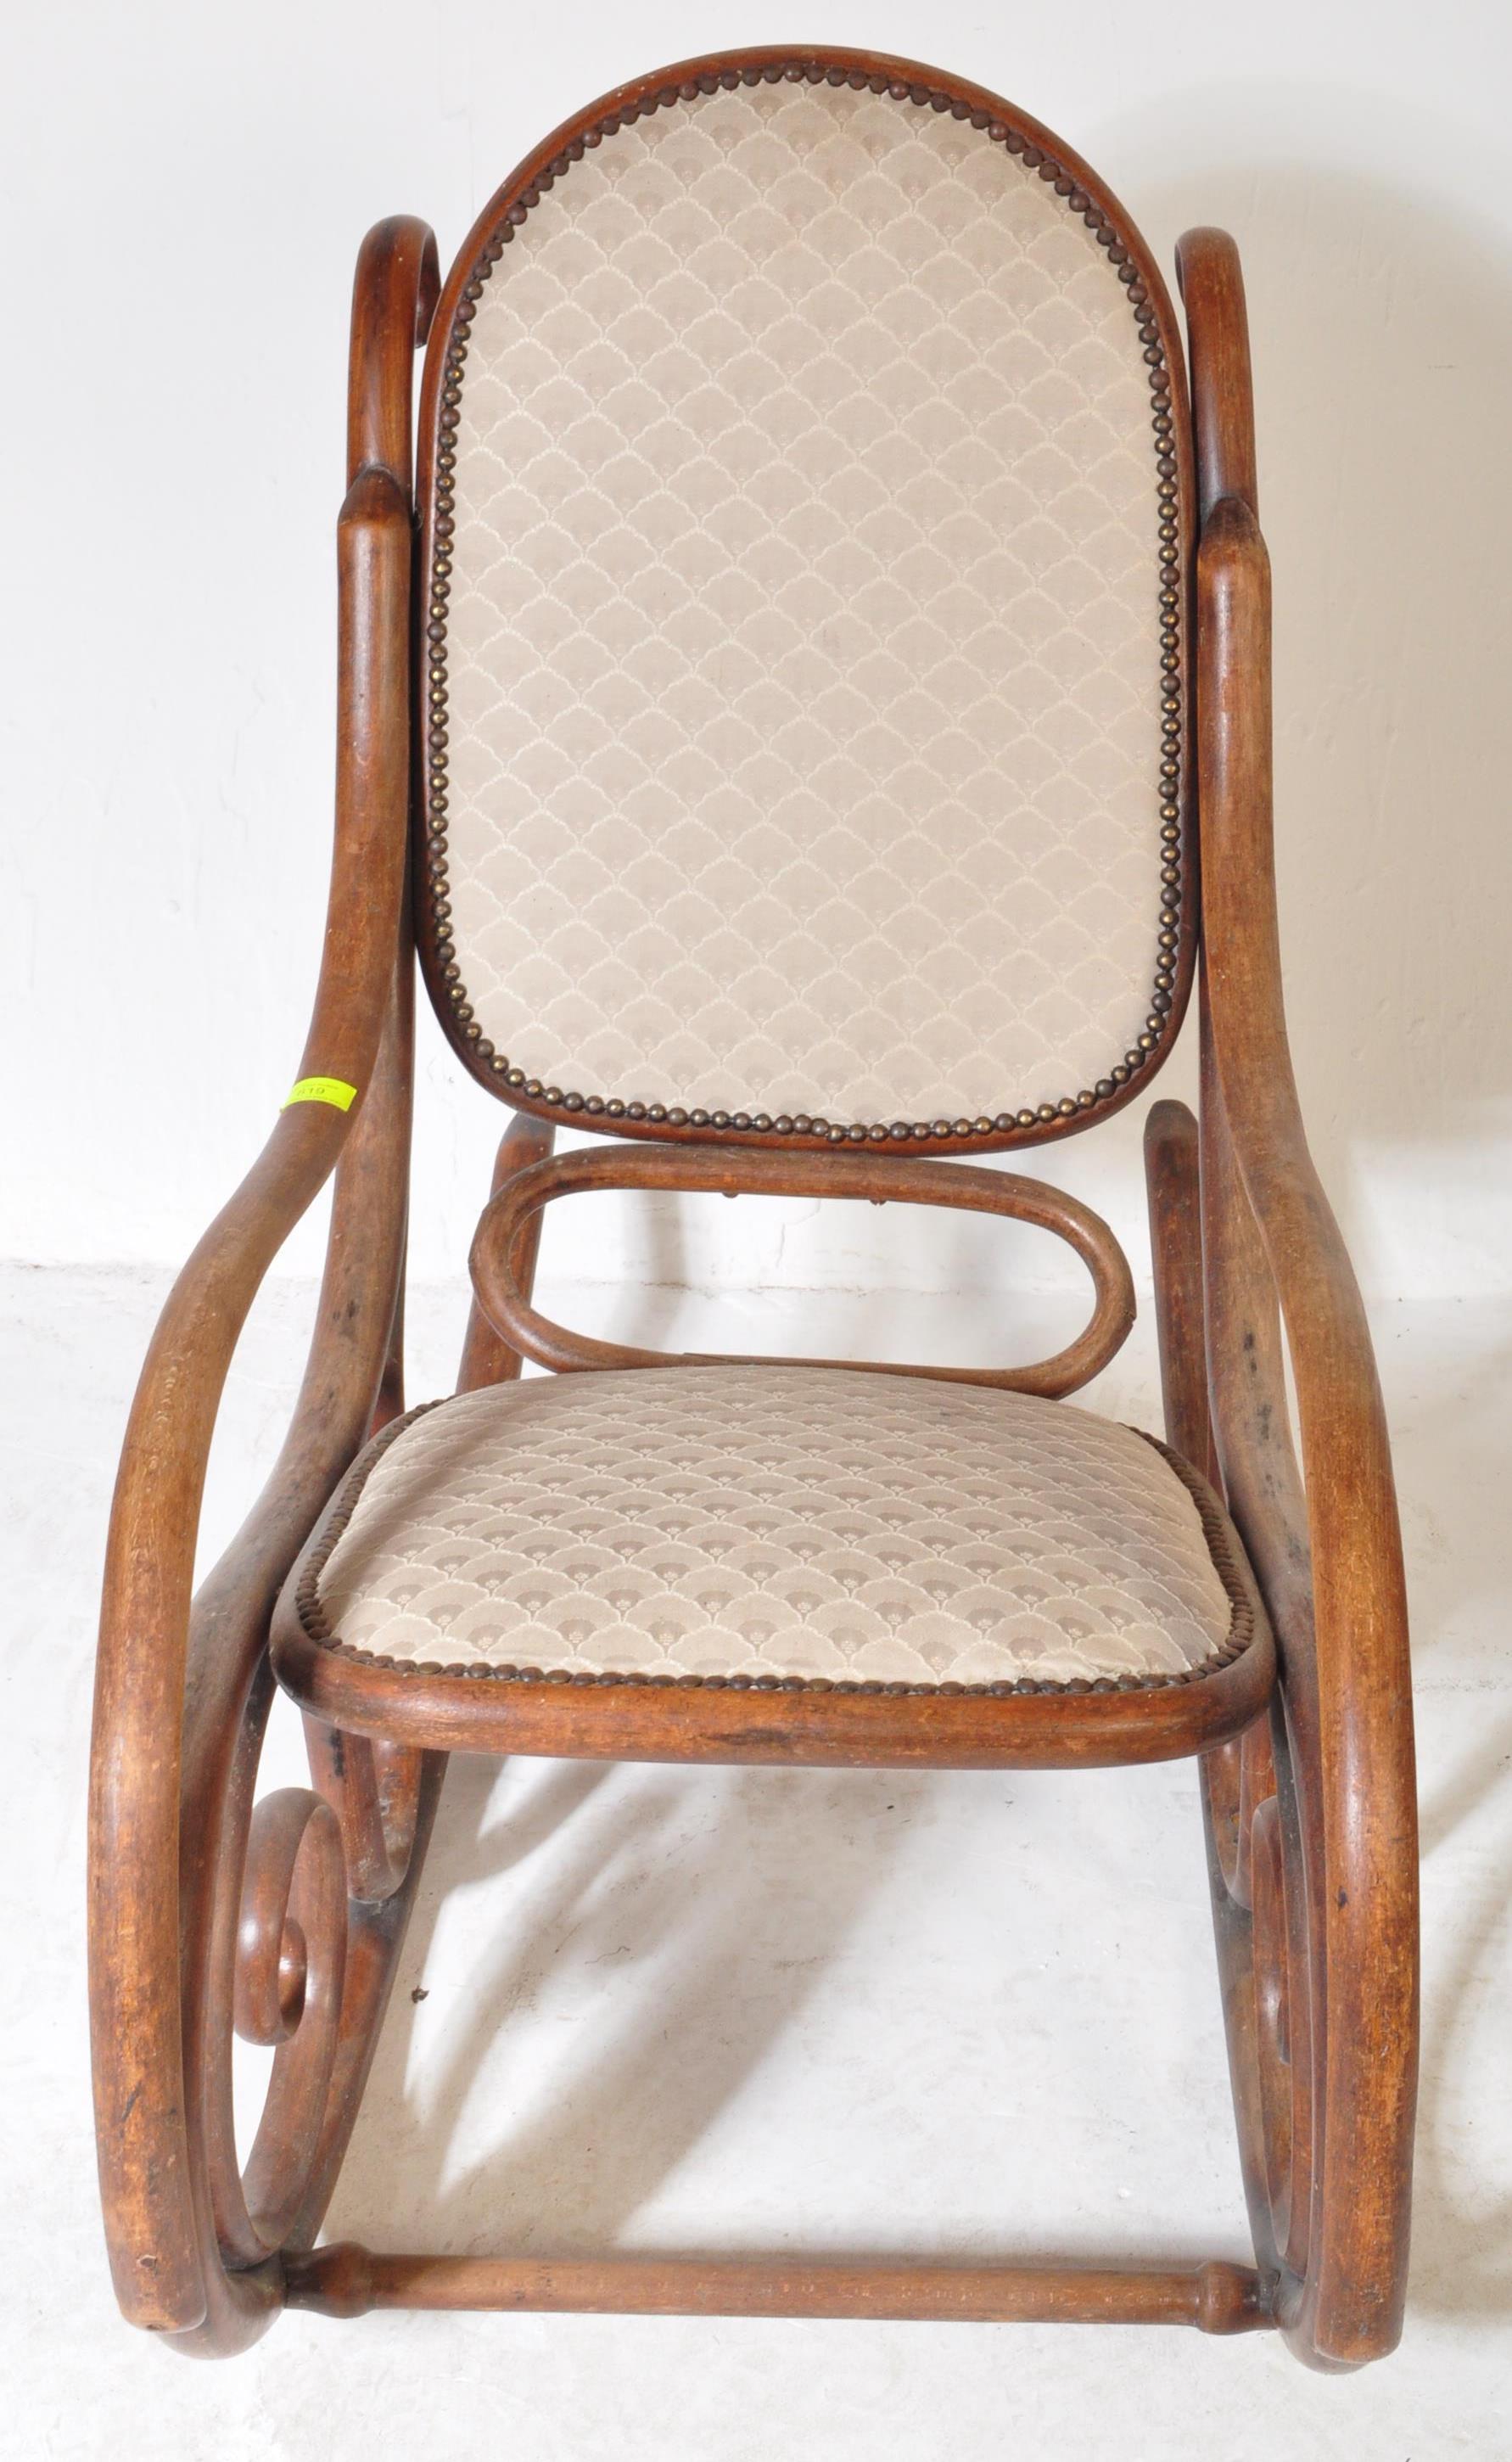 EARLY 20TH CENTURY BENTWOOD & CANE ROCKING CHAIR - Image 3 of 4